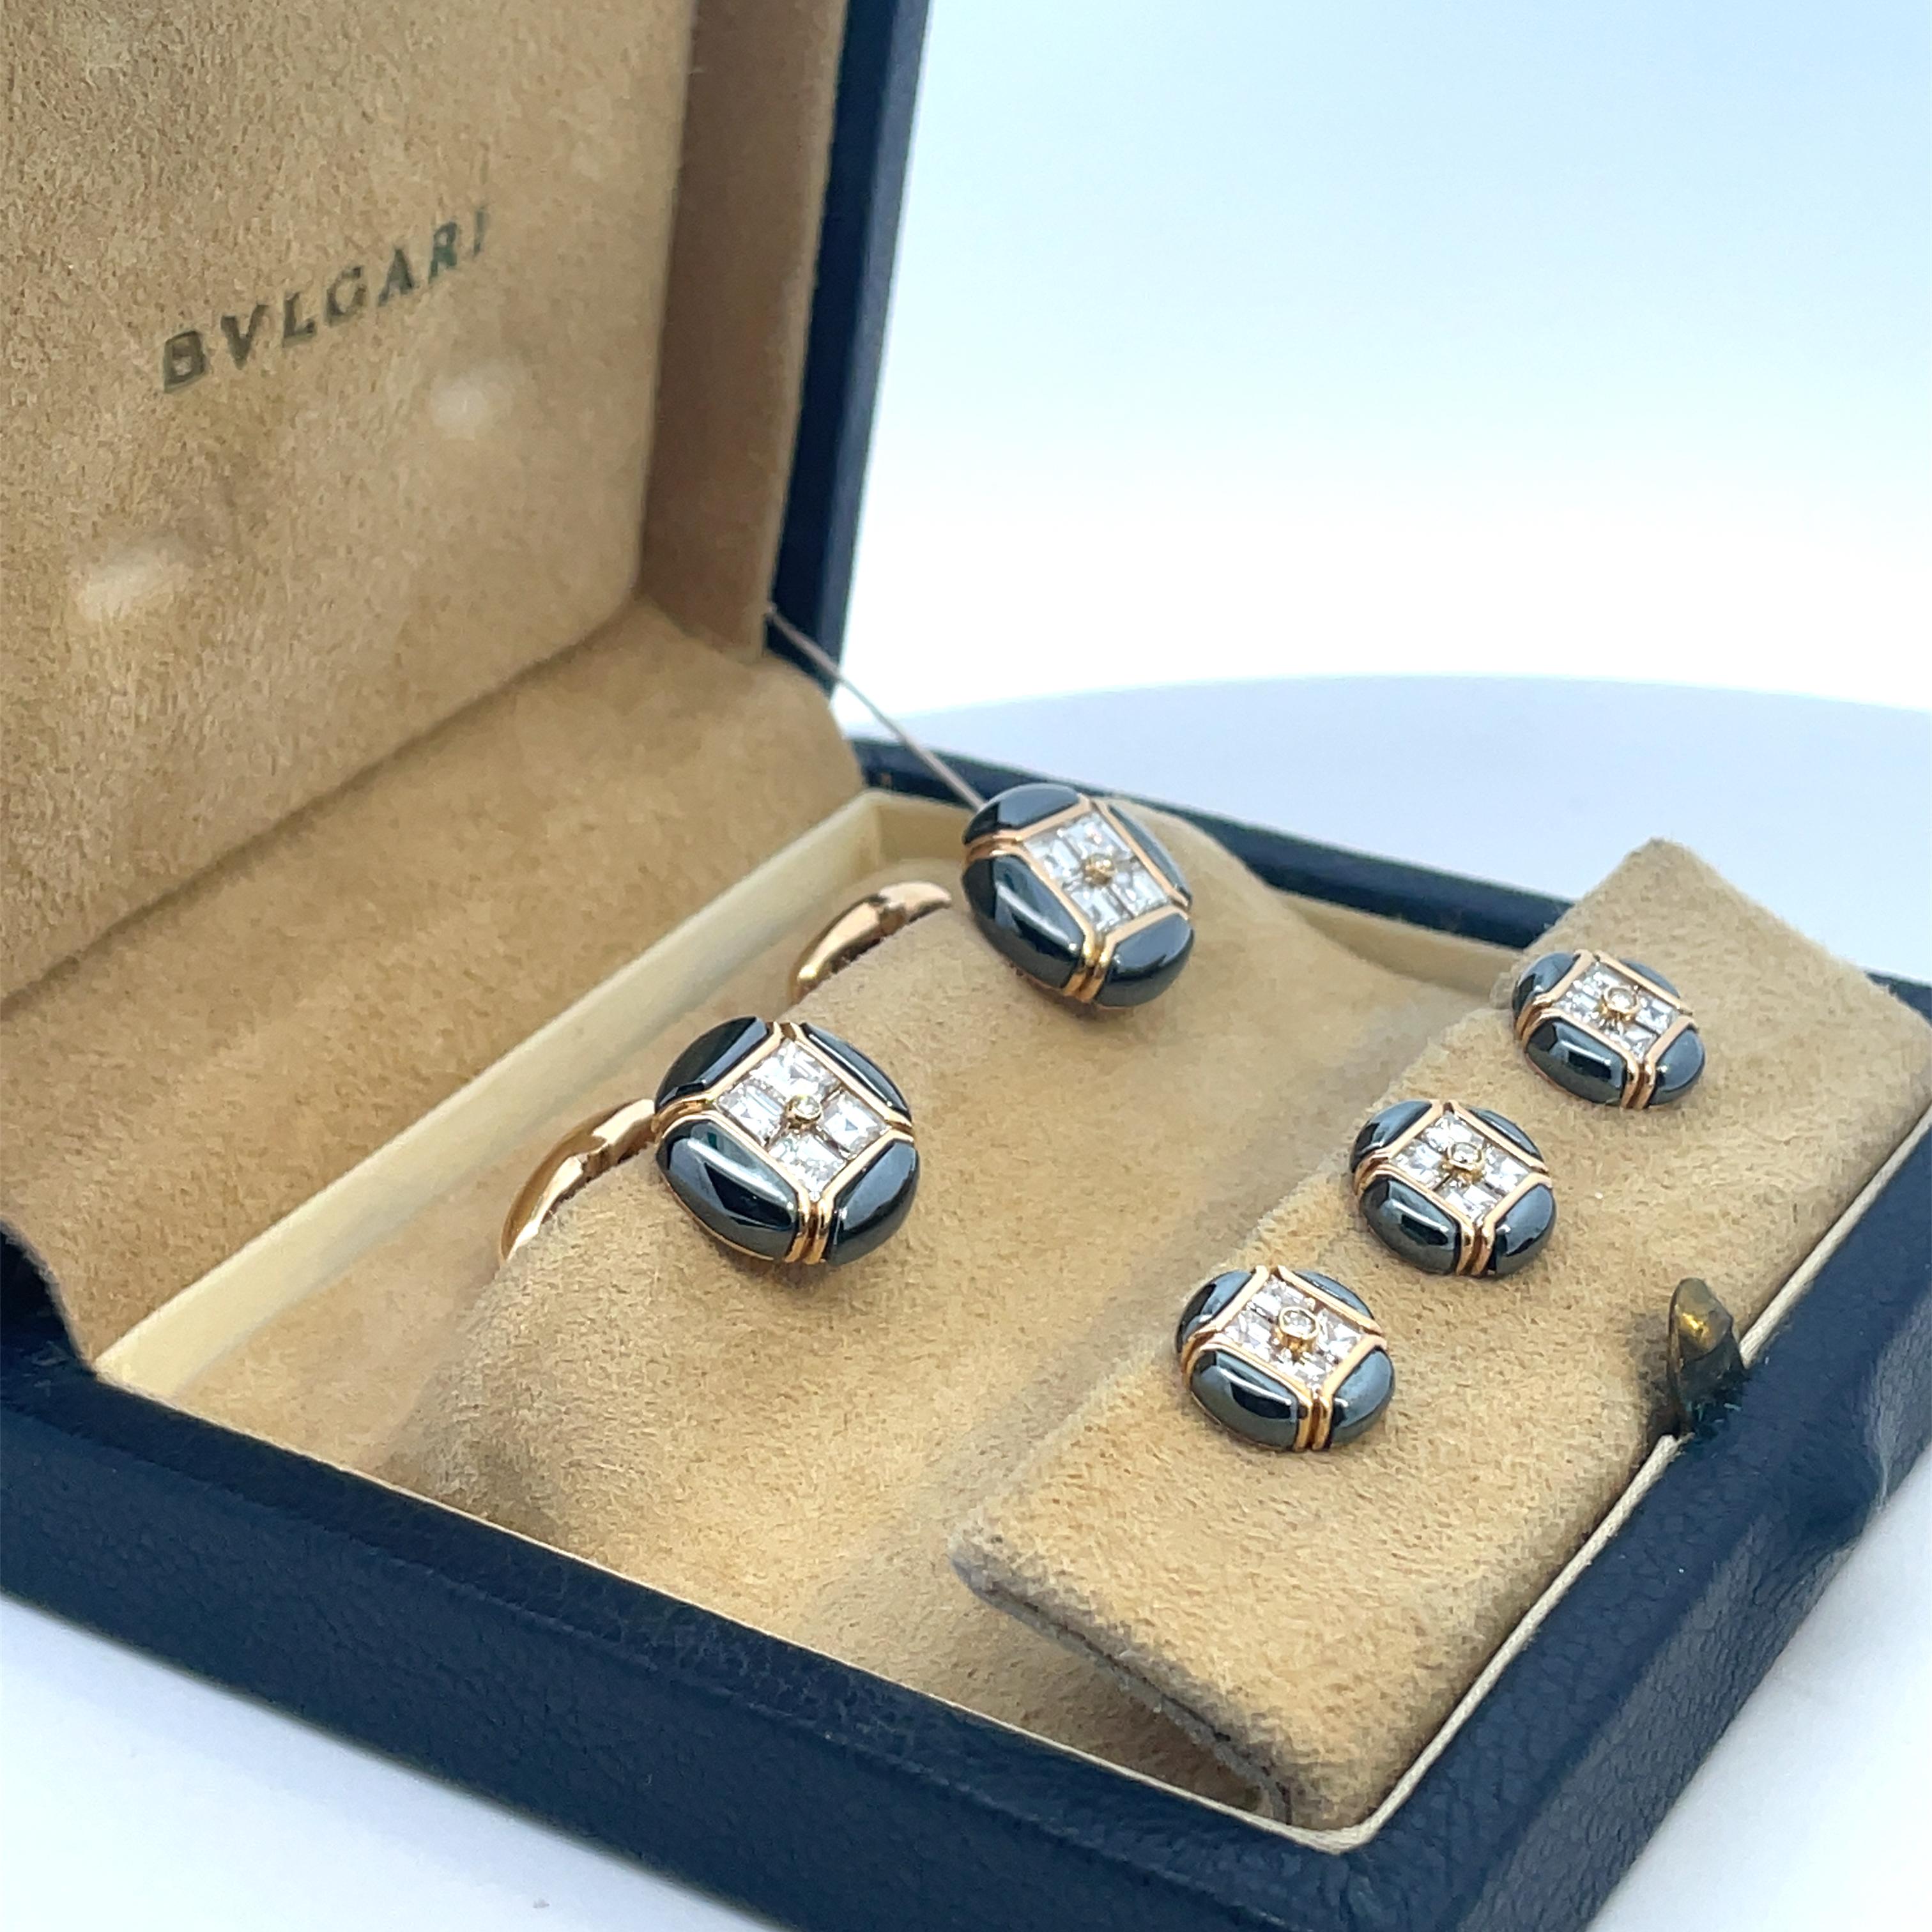 Unique and spectacular Bulgari Gold  Hematite and Diamonds Dress set, comprised of two cufflinks and three shirt button.
As new conditions in original Bulgari fitted Box.
